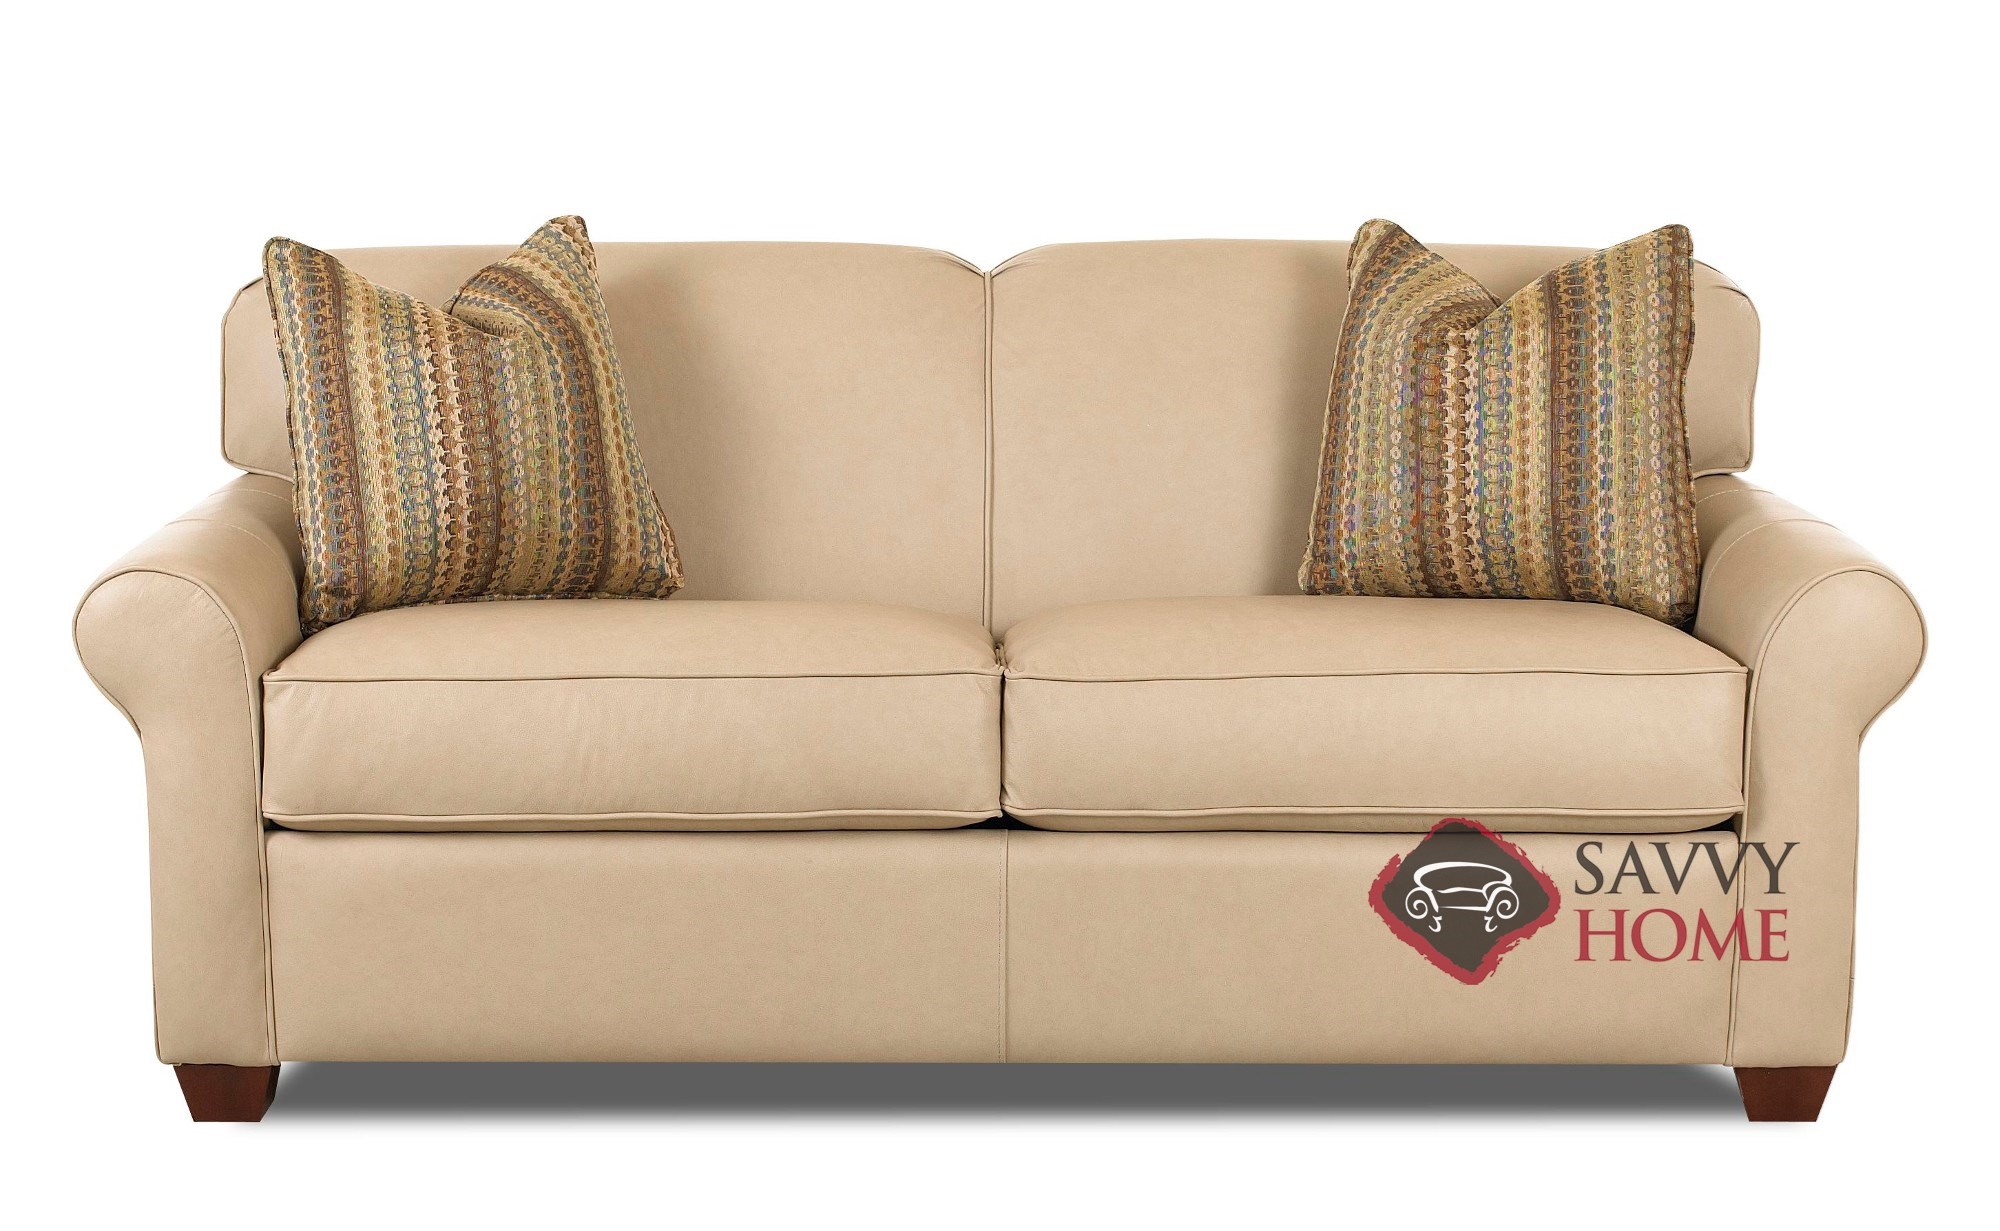 Calgary Leather Sleeper Sofas Full by Savvy is Fully Customizable by